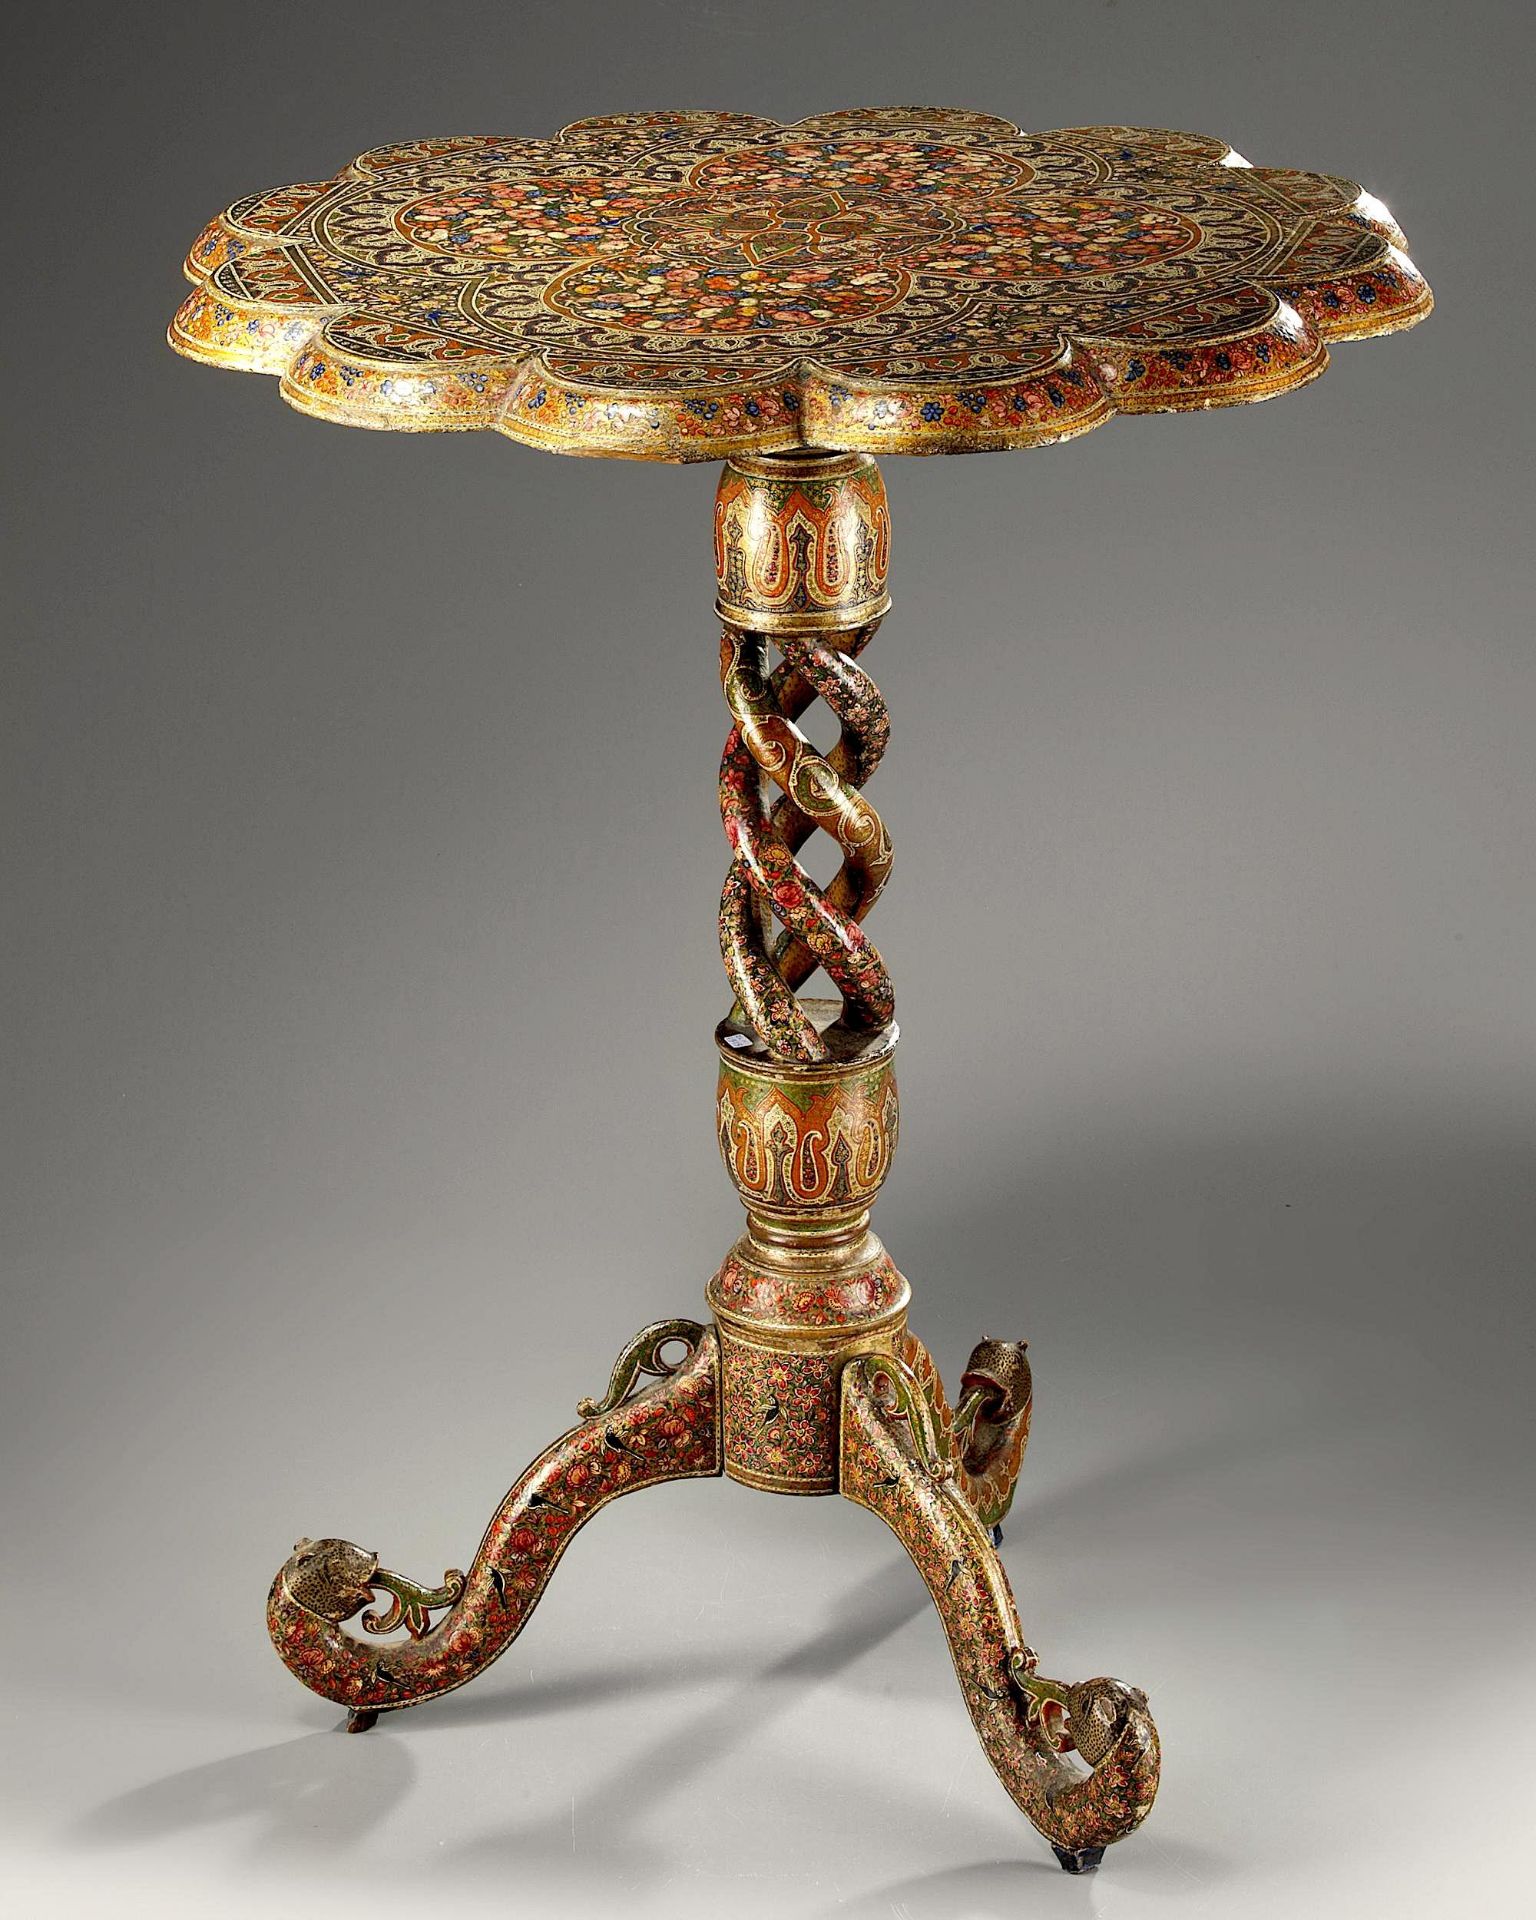 A KASHMIR LACQUERED WOOD TABLE, KASHMIR, 19TH CENTURY - Image 2 of 3